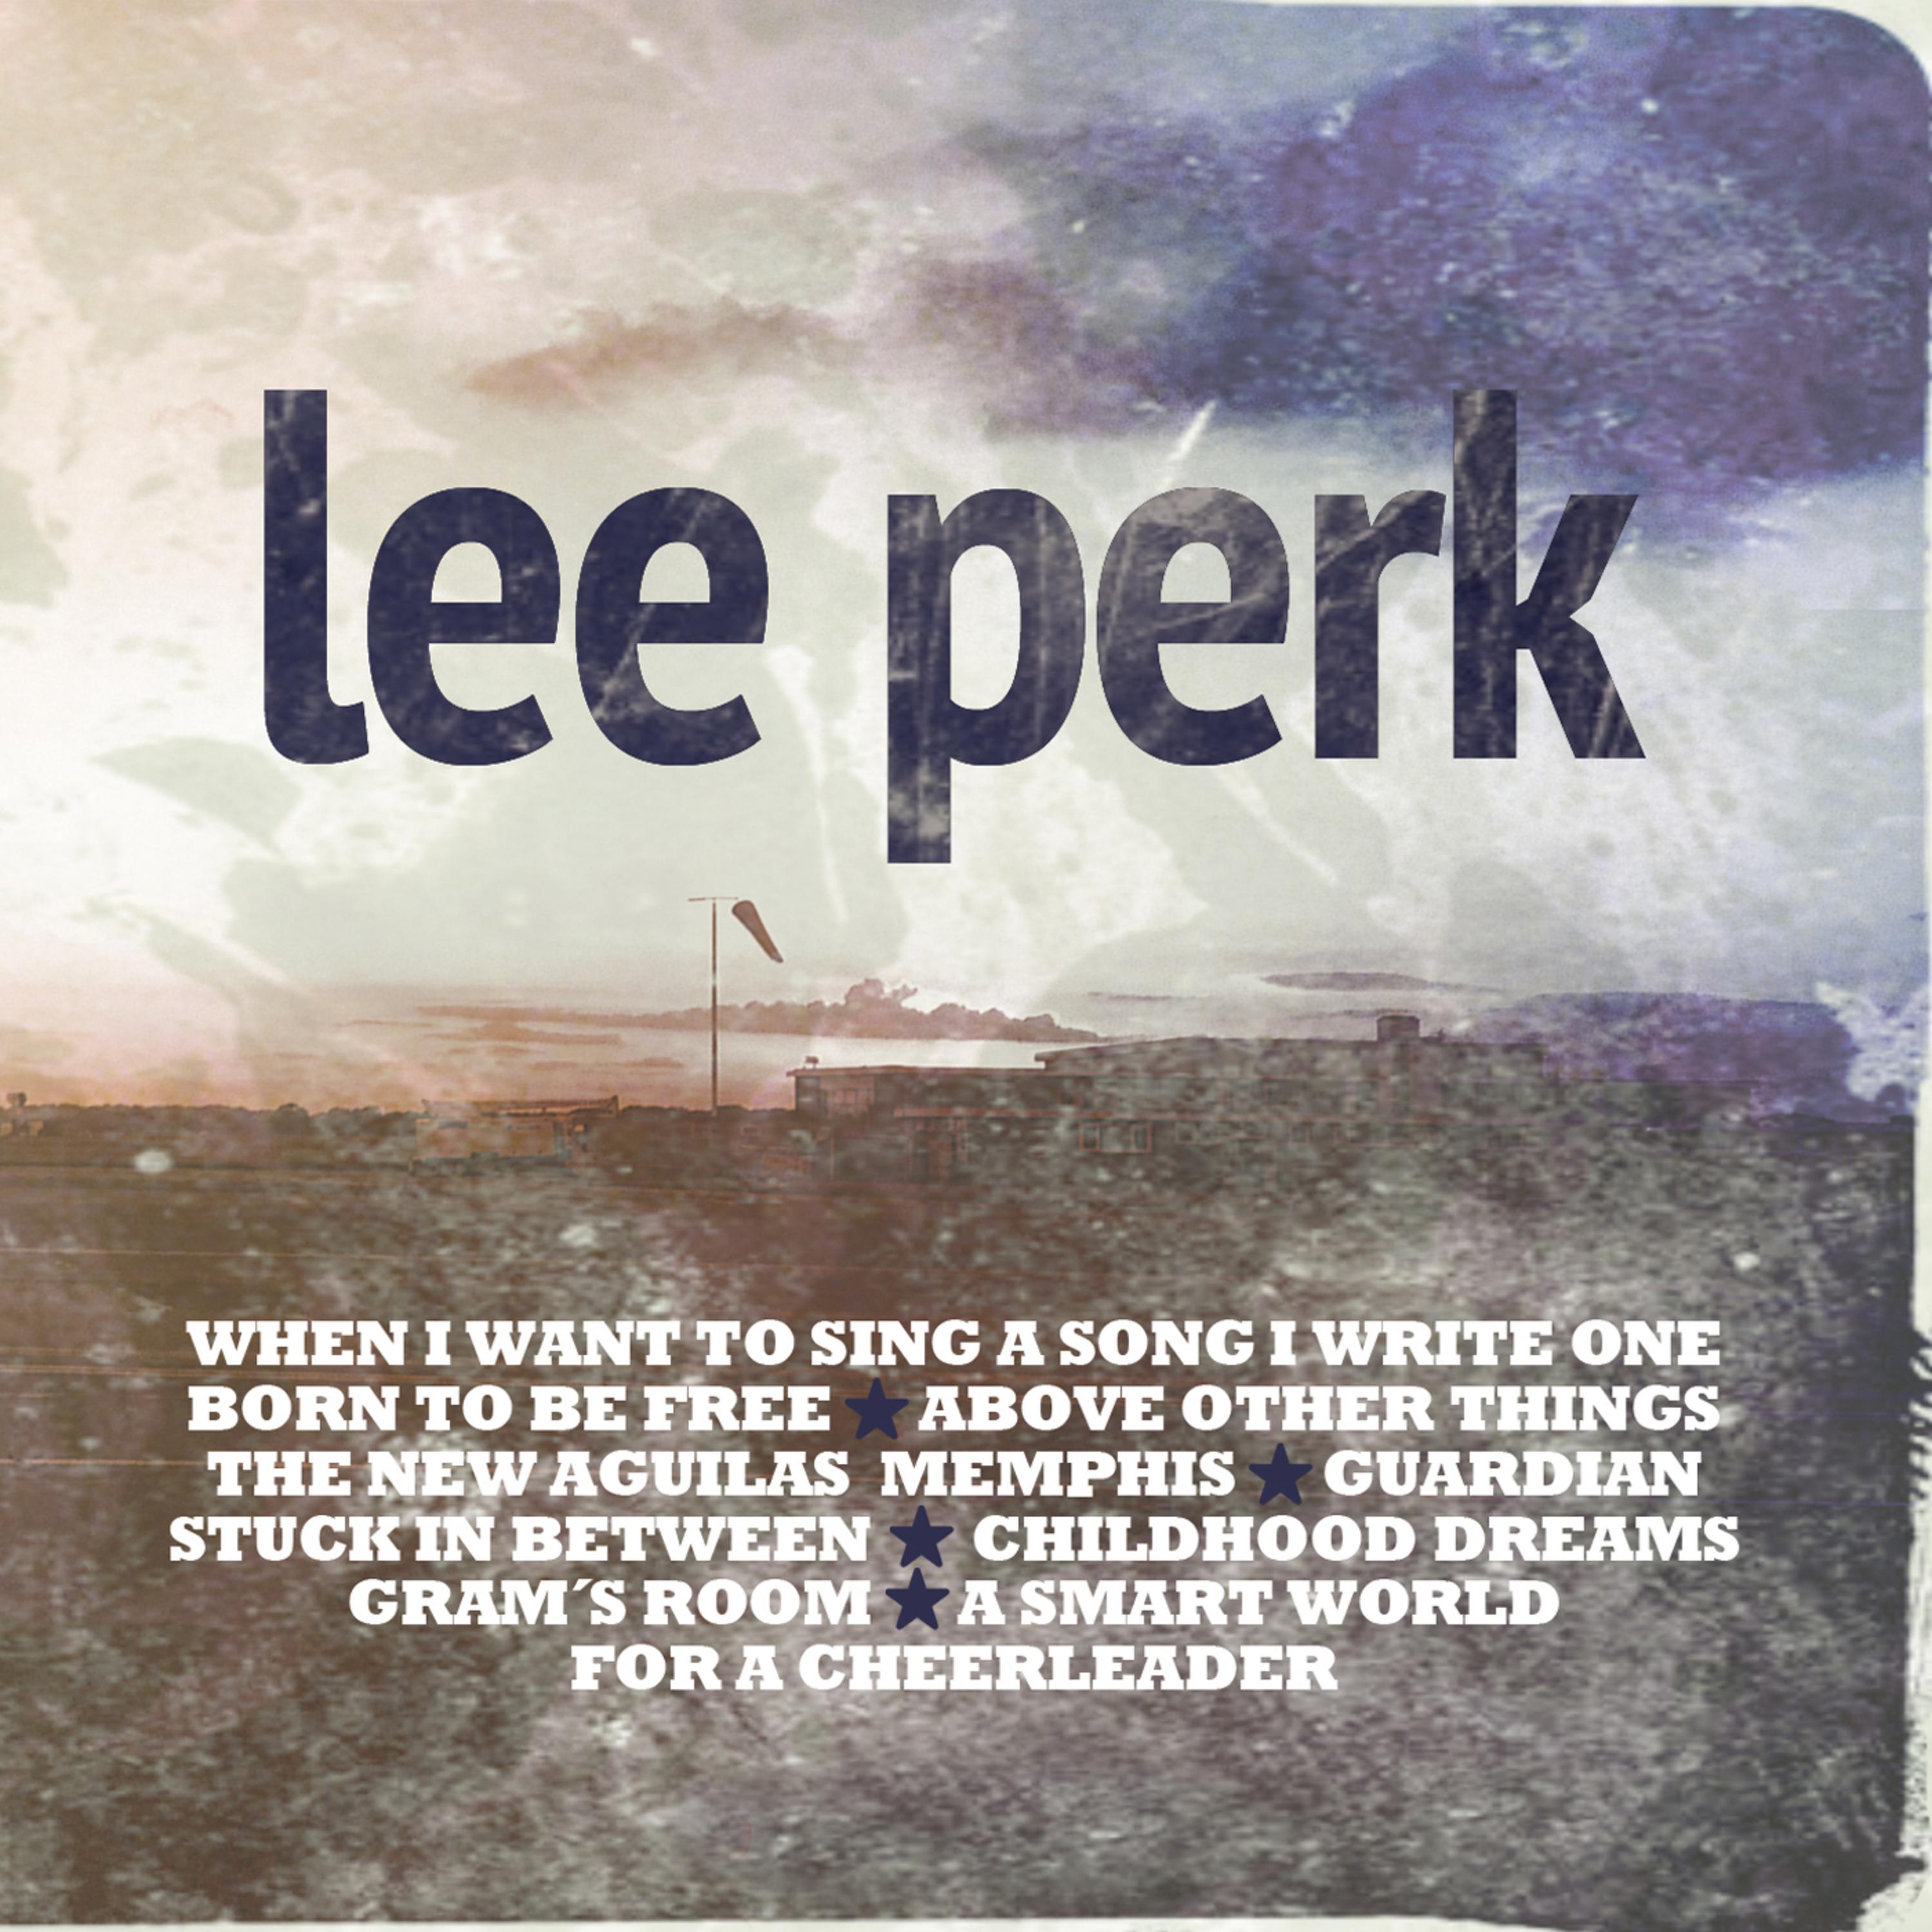 Lee Perk - When I Want to Sing a Song I Write One